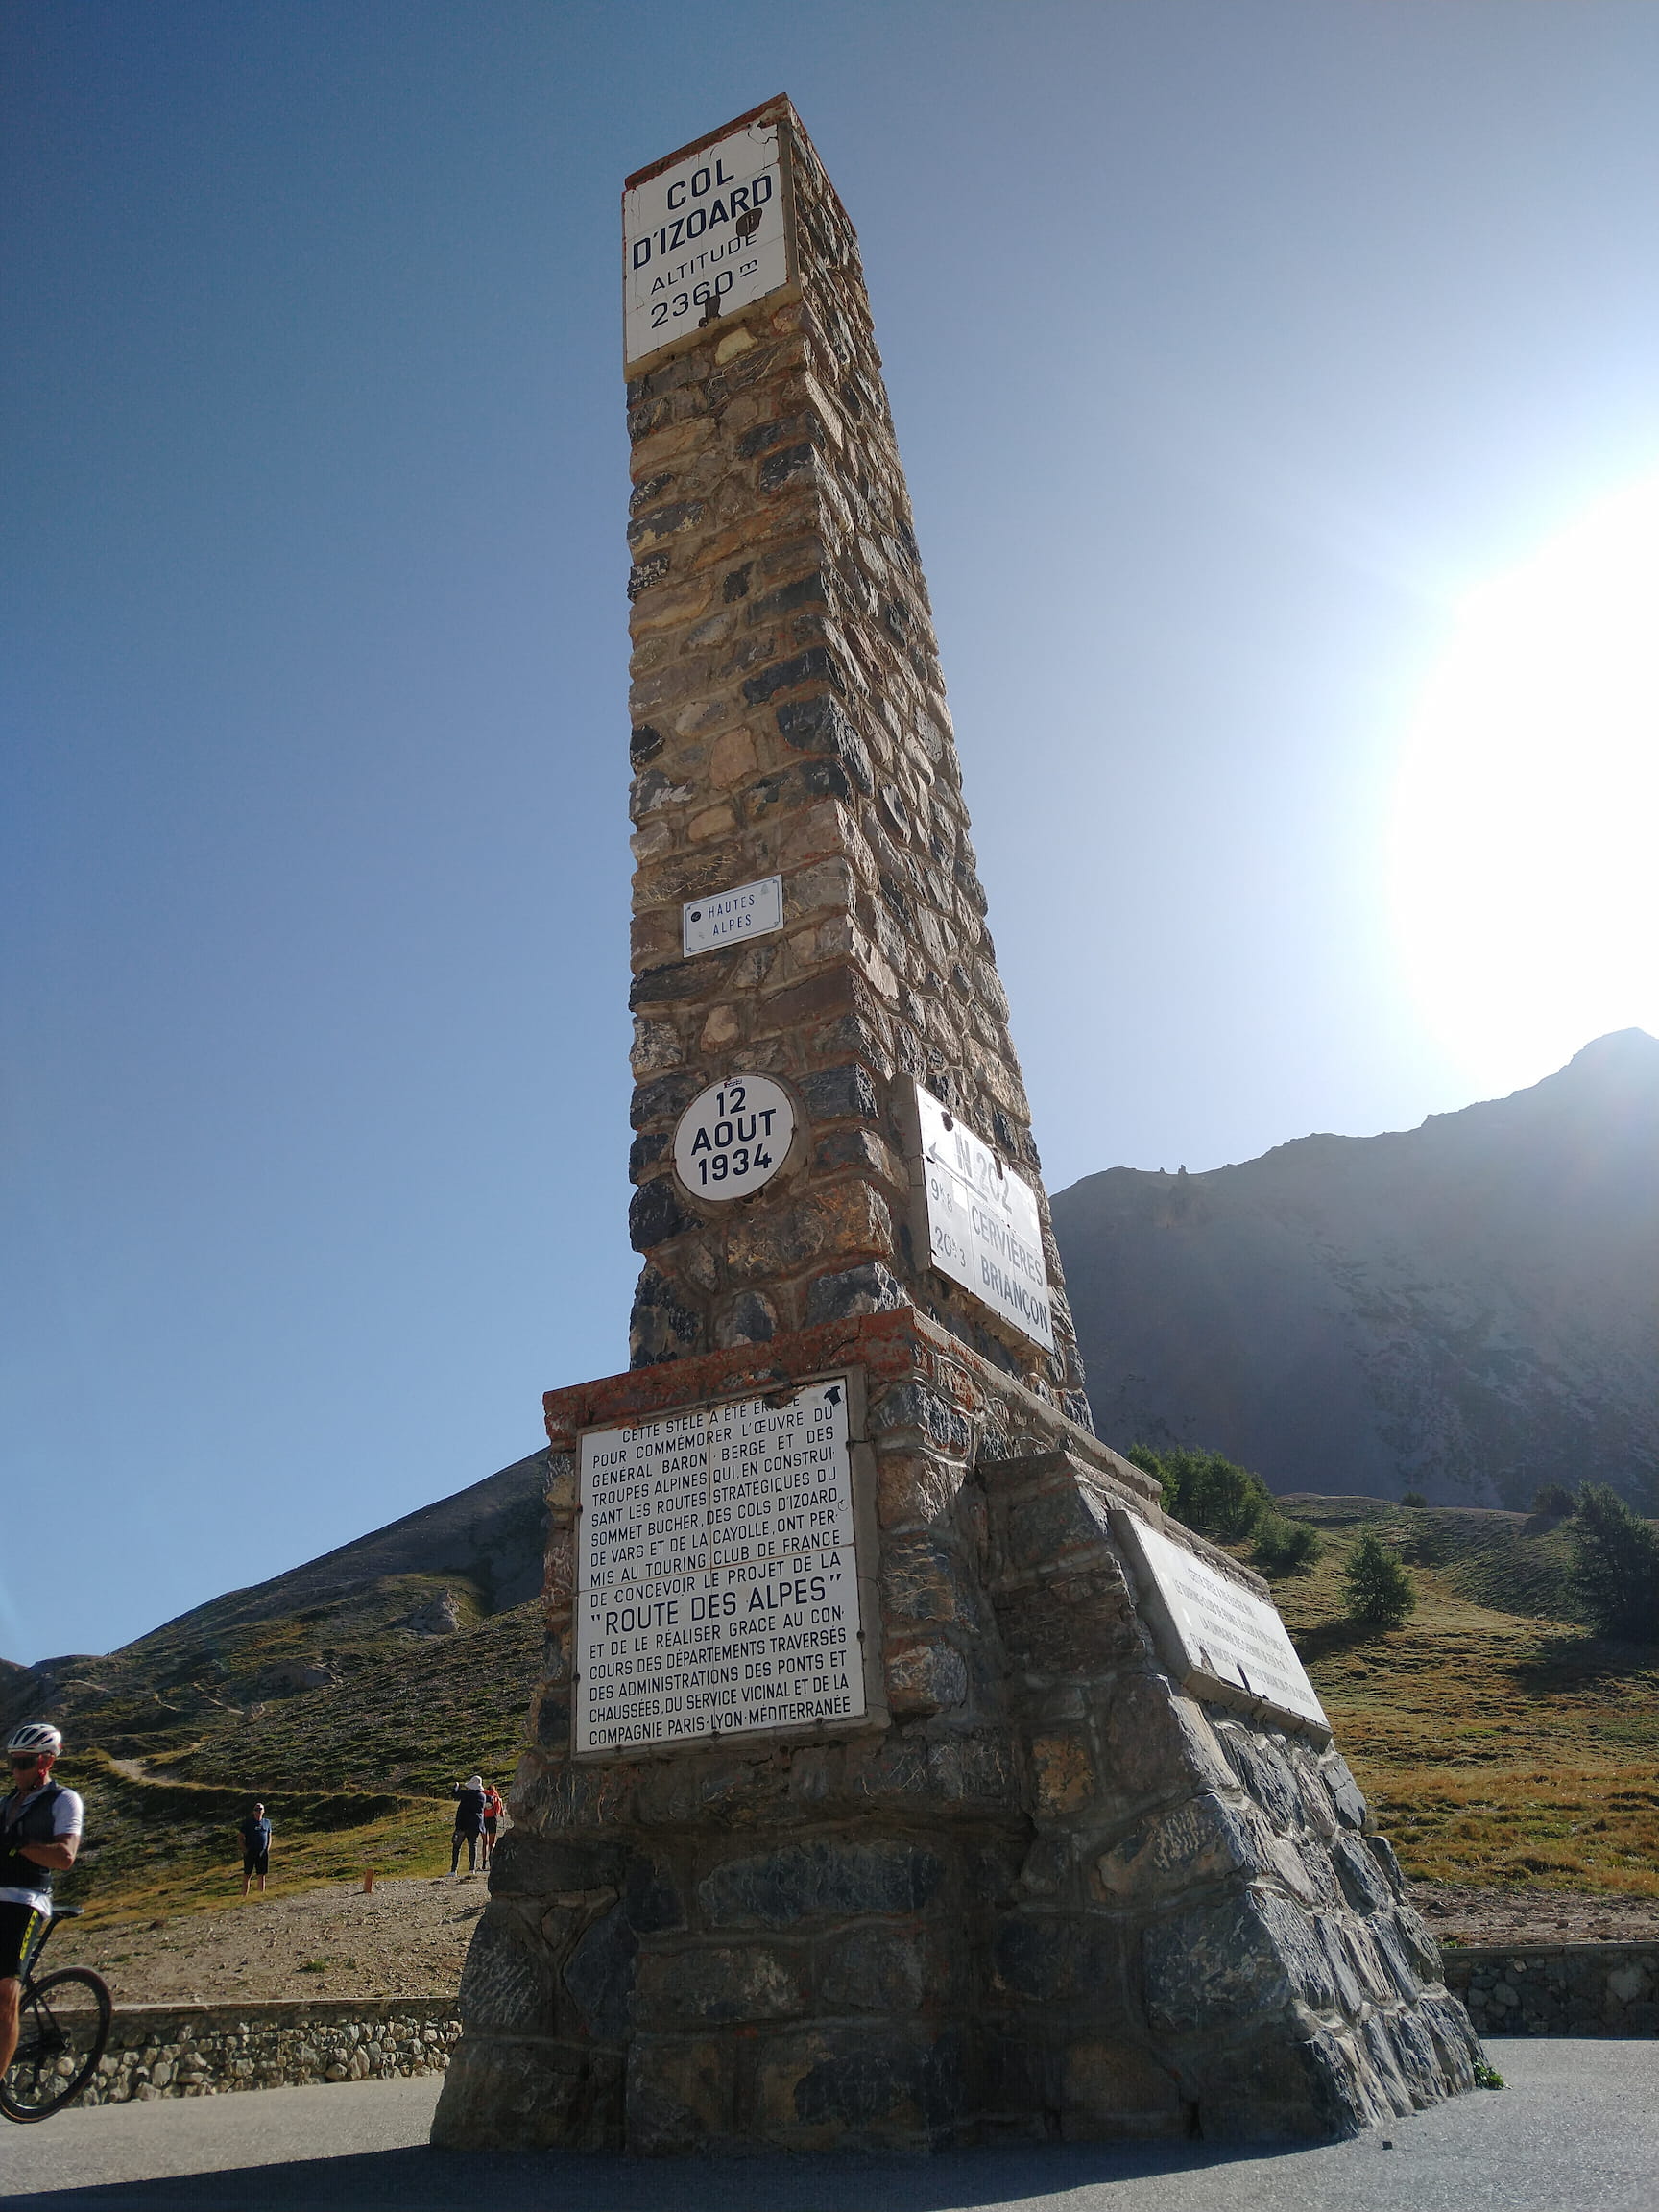 The monument at the top of Col d'Izoard